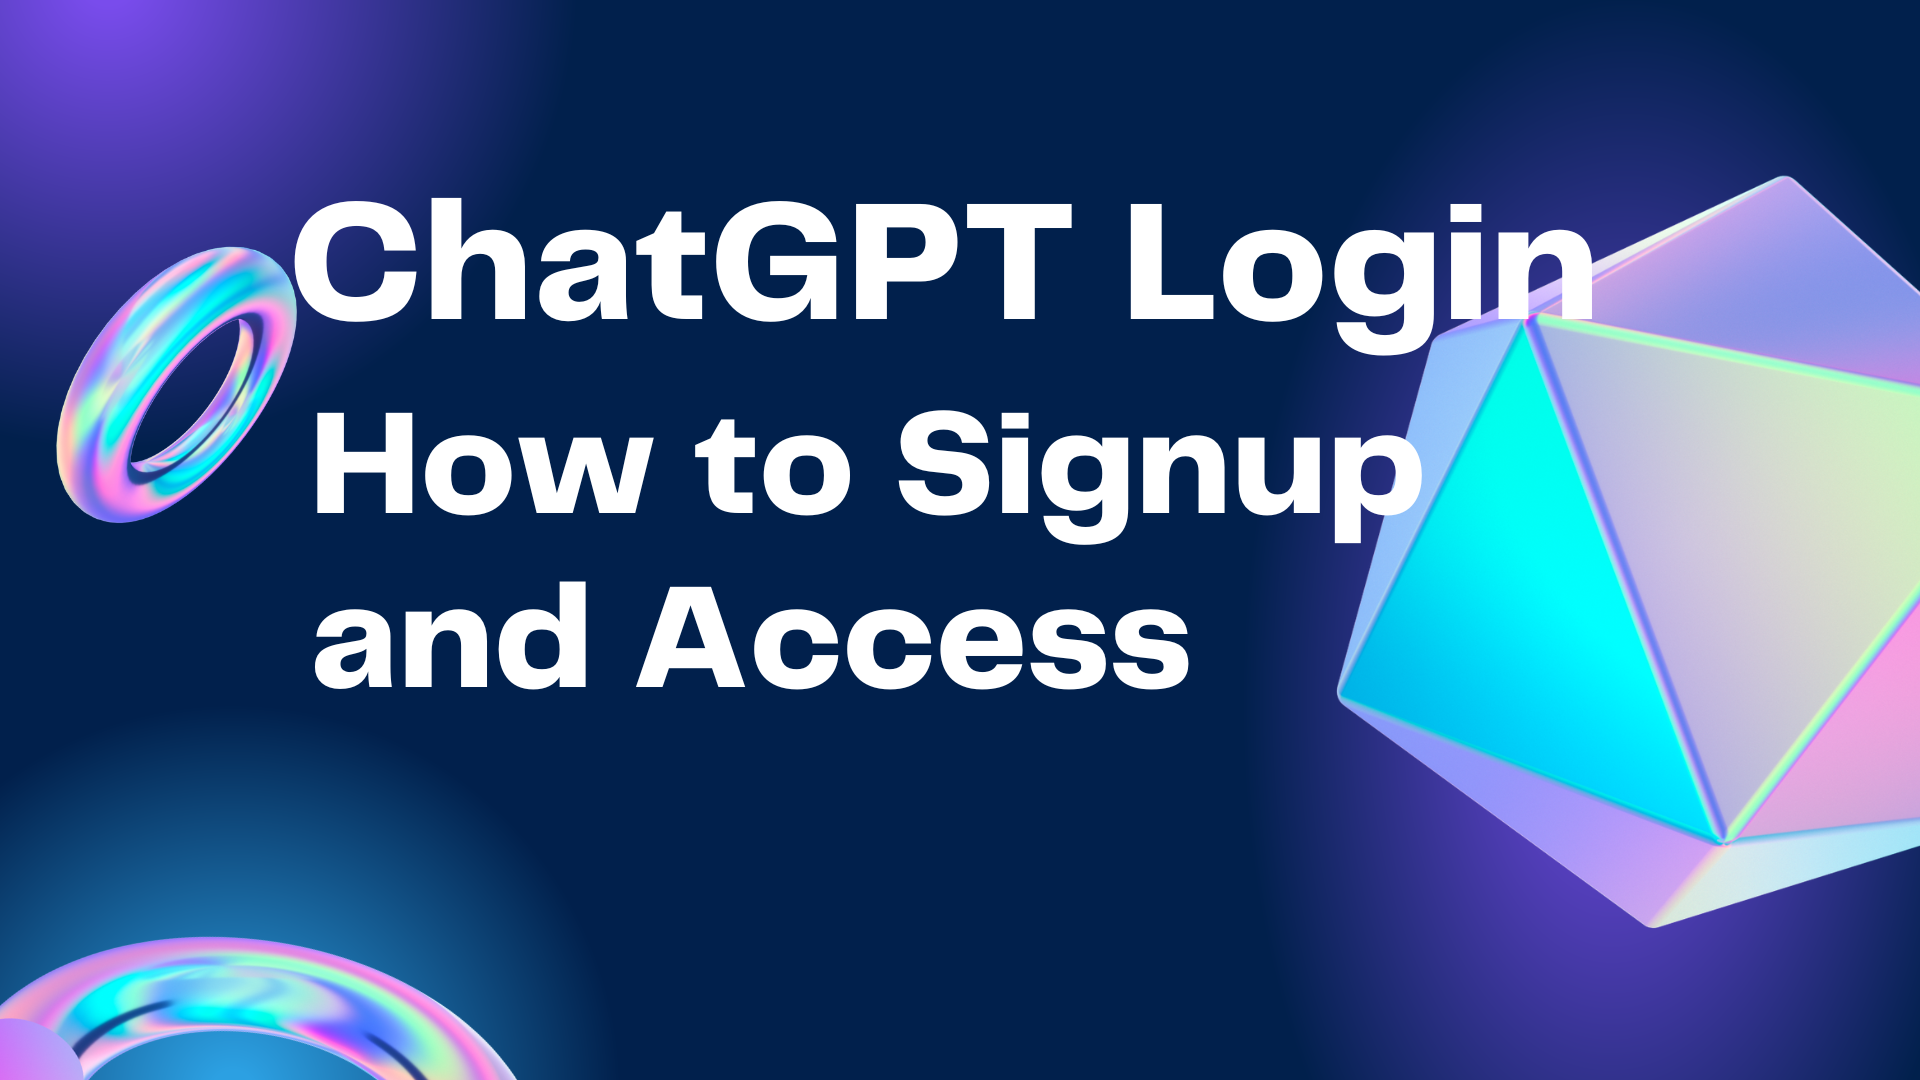 ChatGPT Login – How to Signup and Access